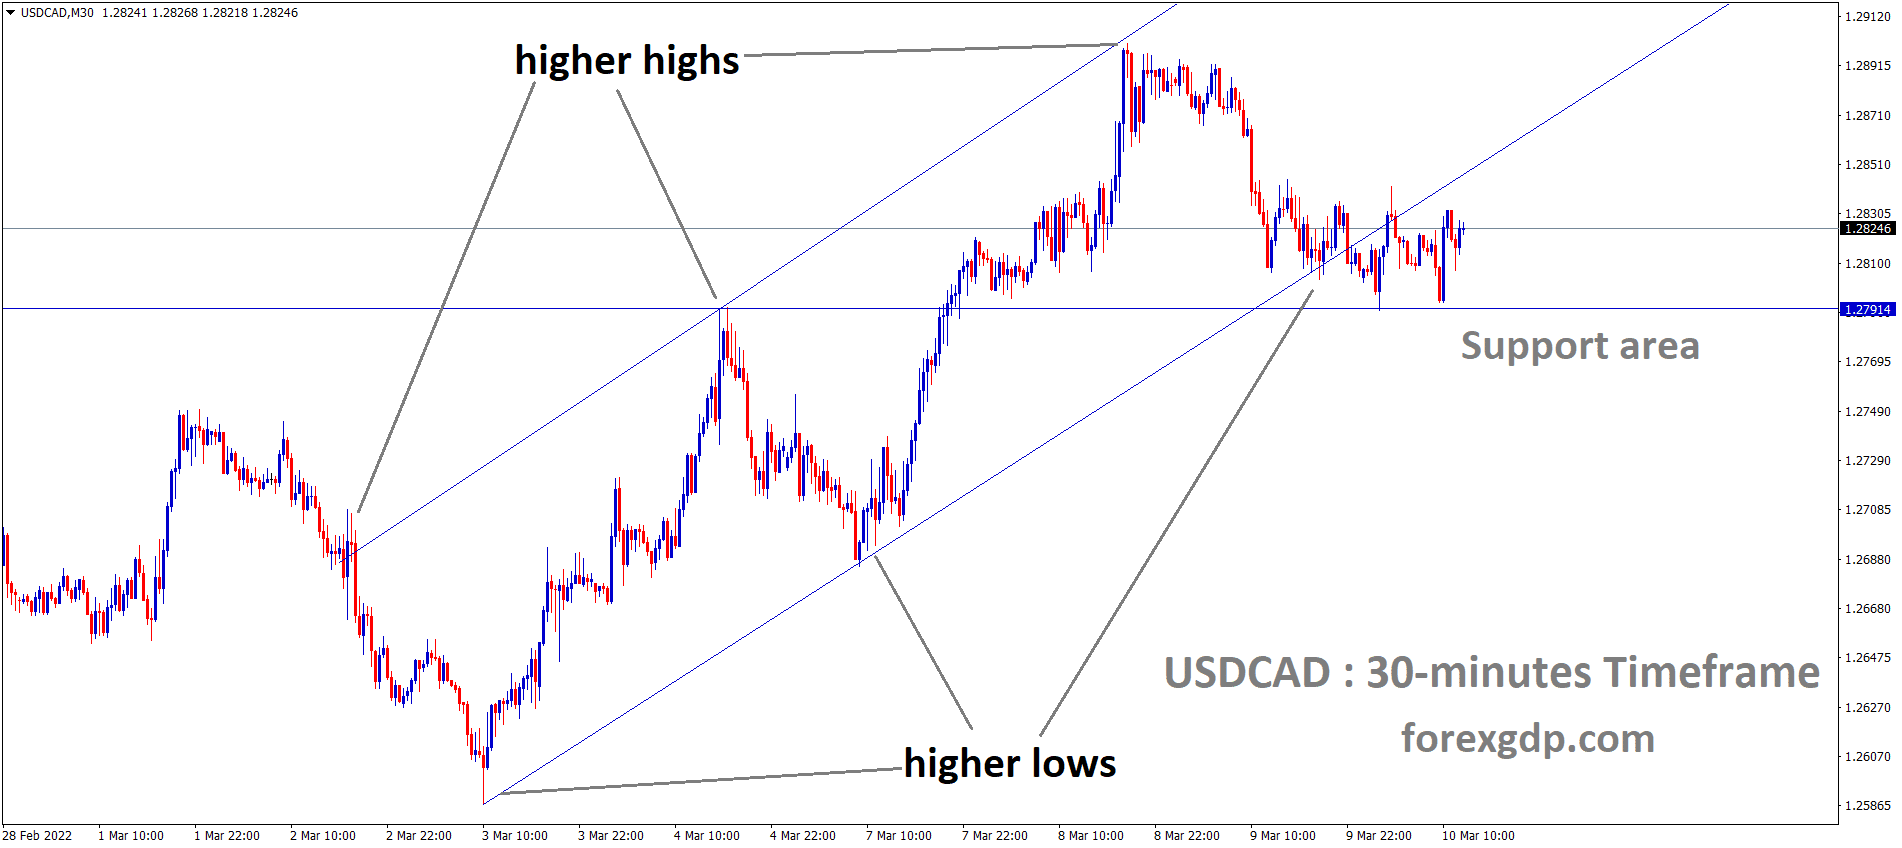 USDCAD is moving in an Ascending channel and the market has rebounded from the Horizontal Support area of the Ascending channel